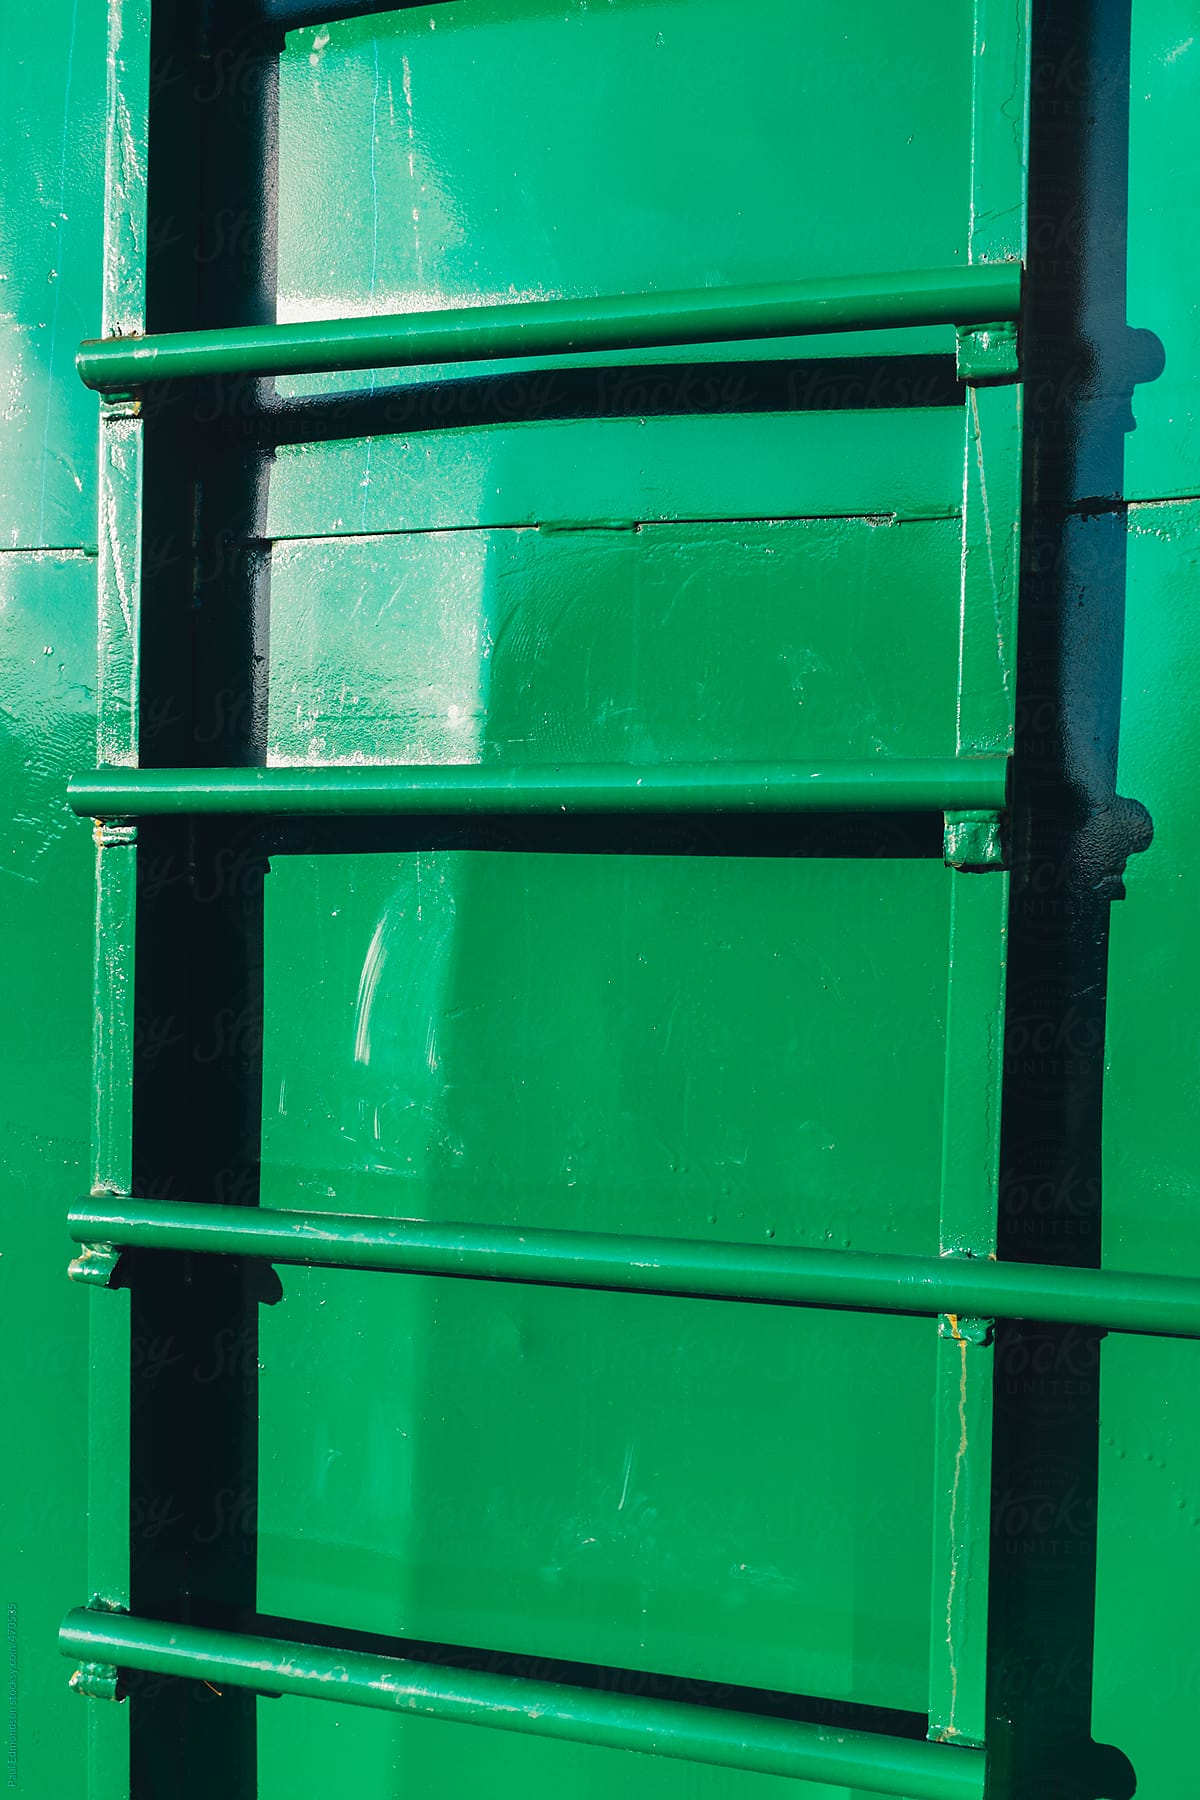 Ladder on green metal container, close up